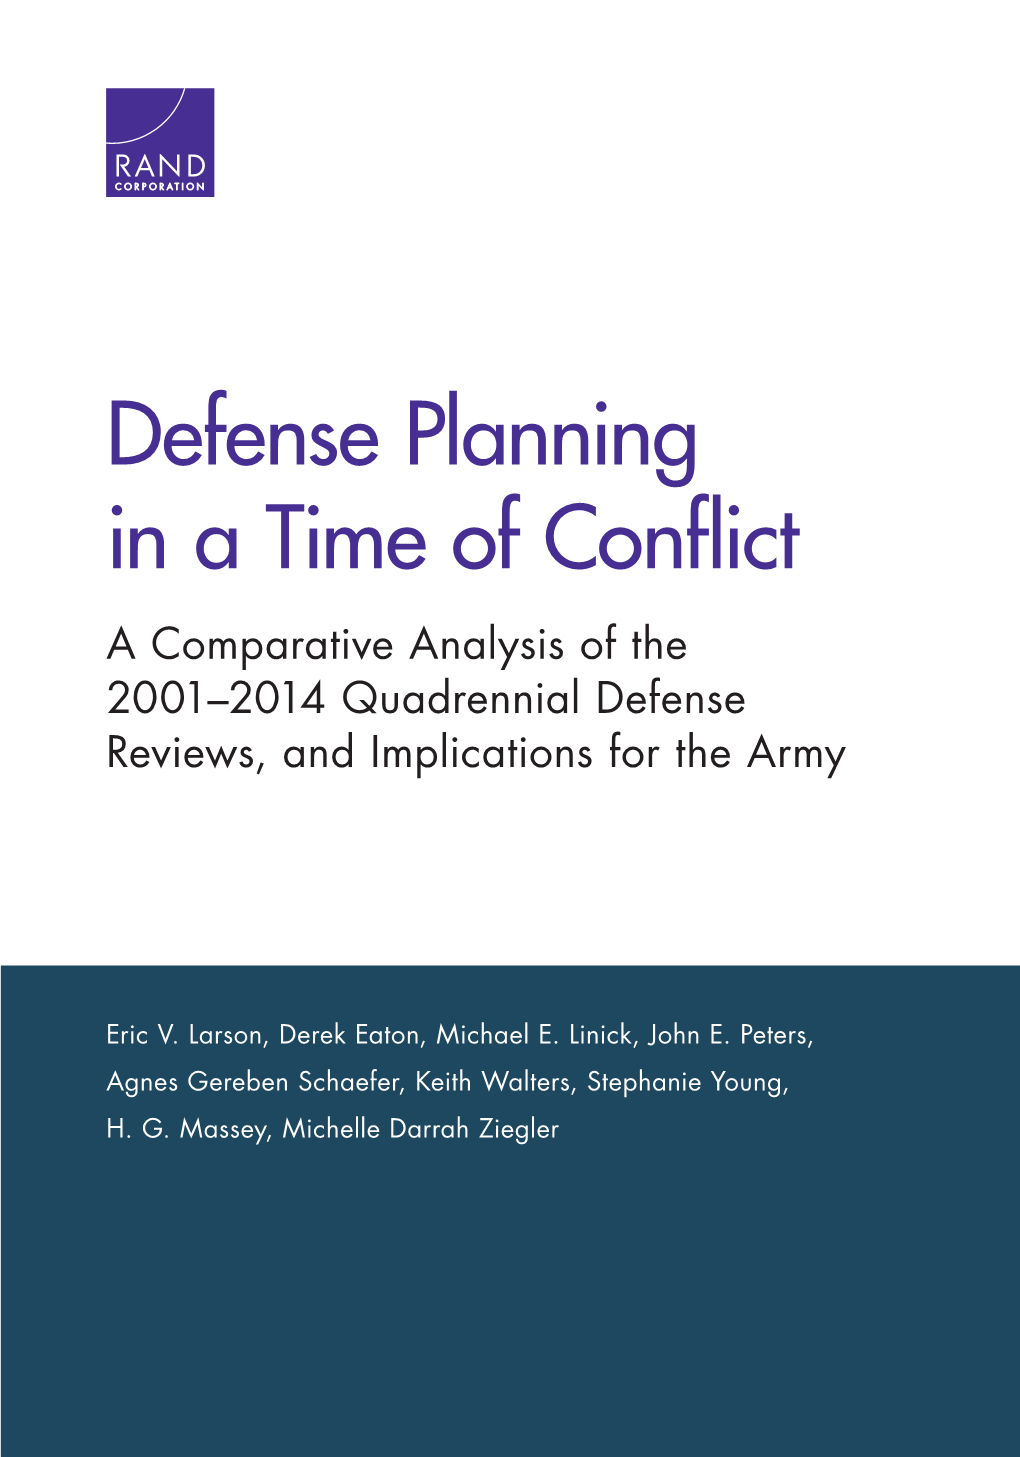 Defense Planning in a Time of Conflict a Comparative Analysis of the 2001–2014 Quadrennial Defense Reviews, and Implications for the Army